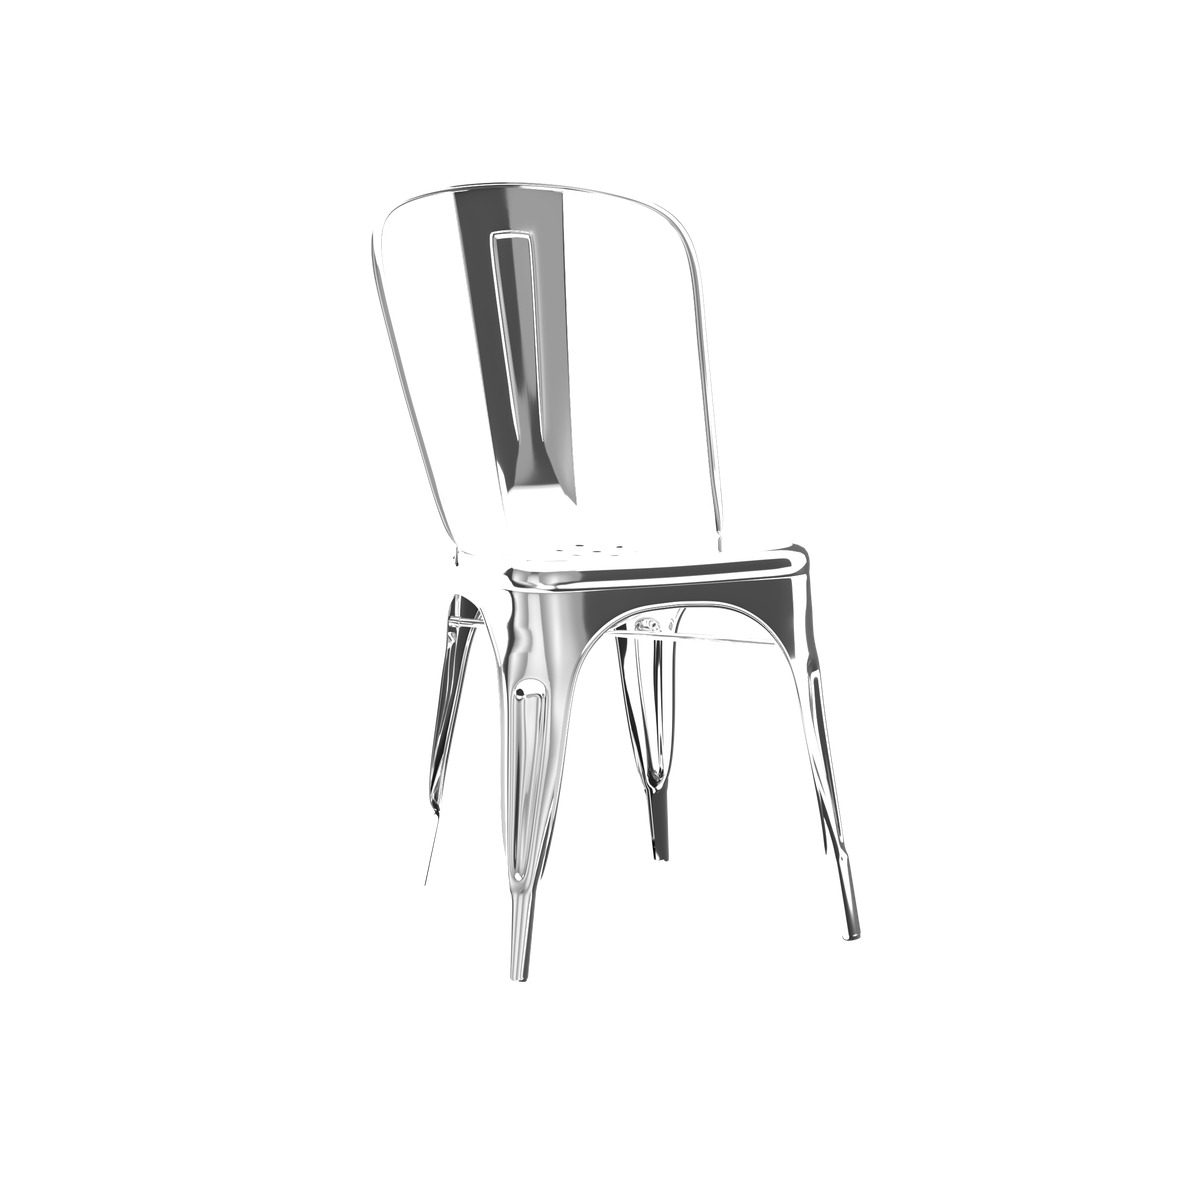  A silver metal chair with four legs an open back with one support brace and no cushion.